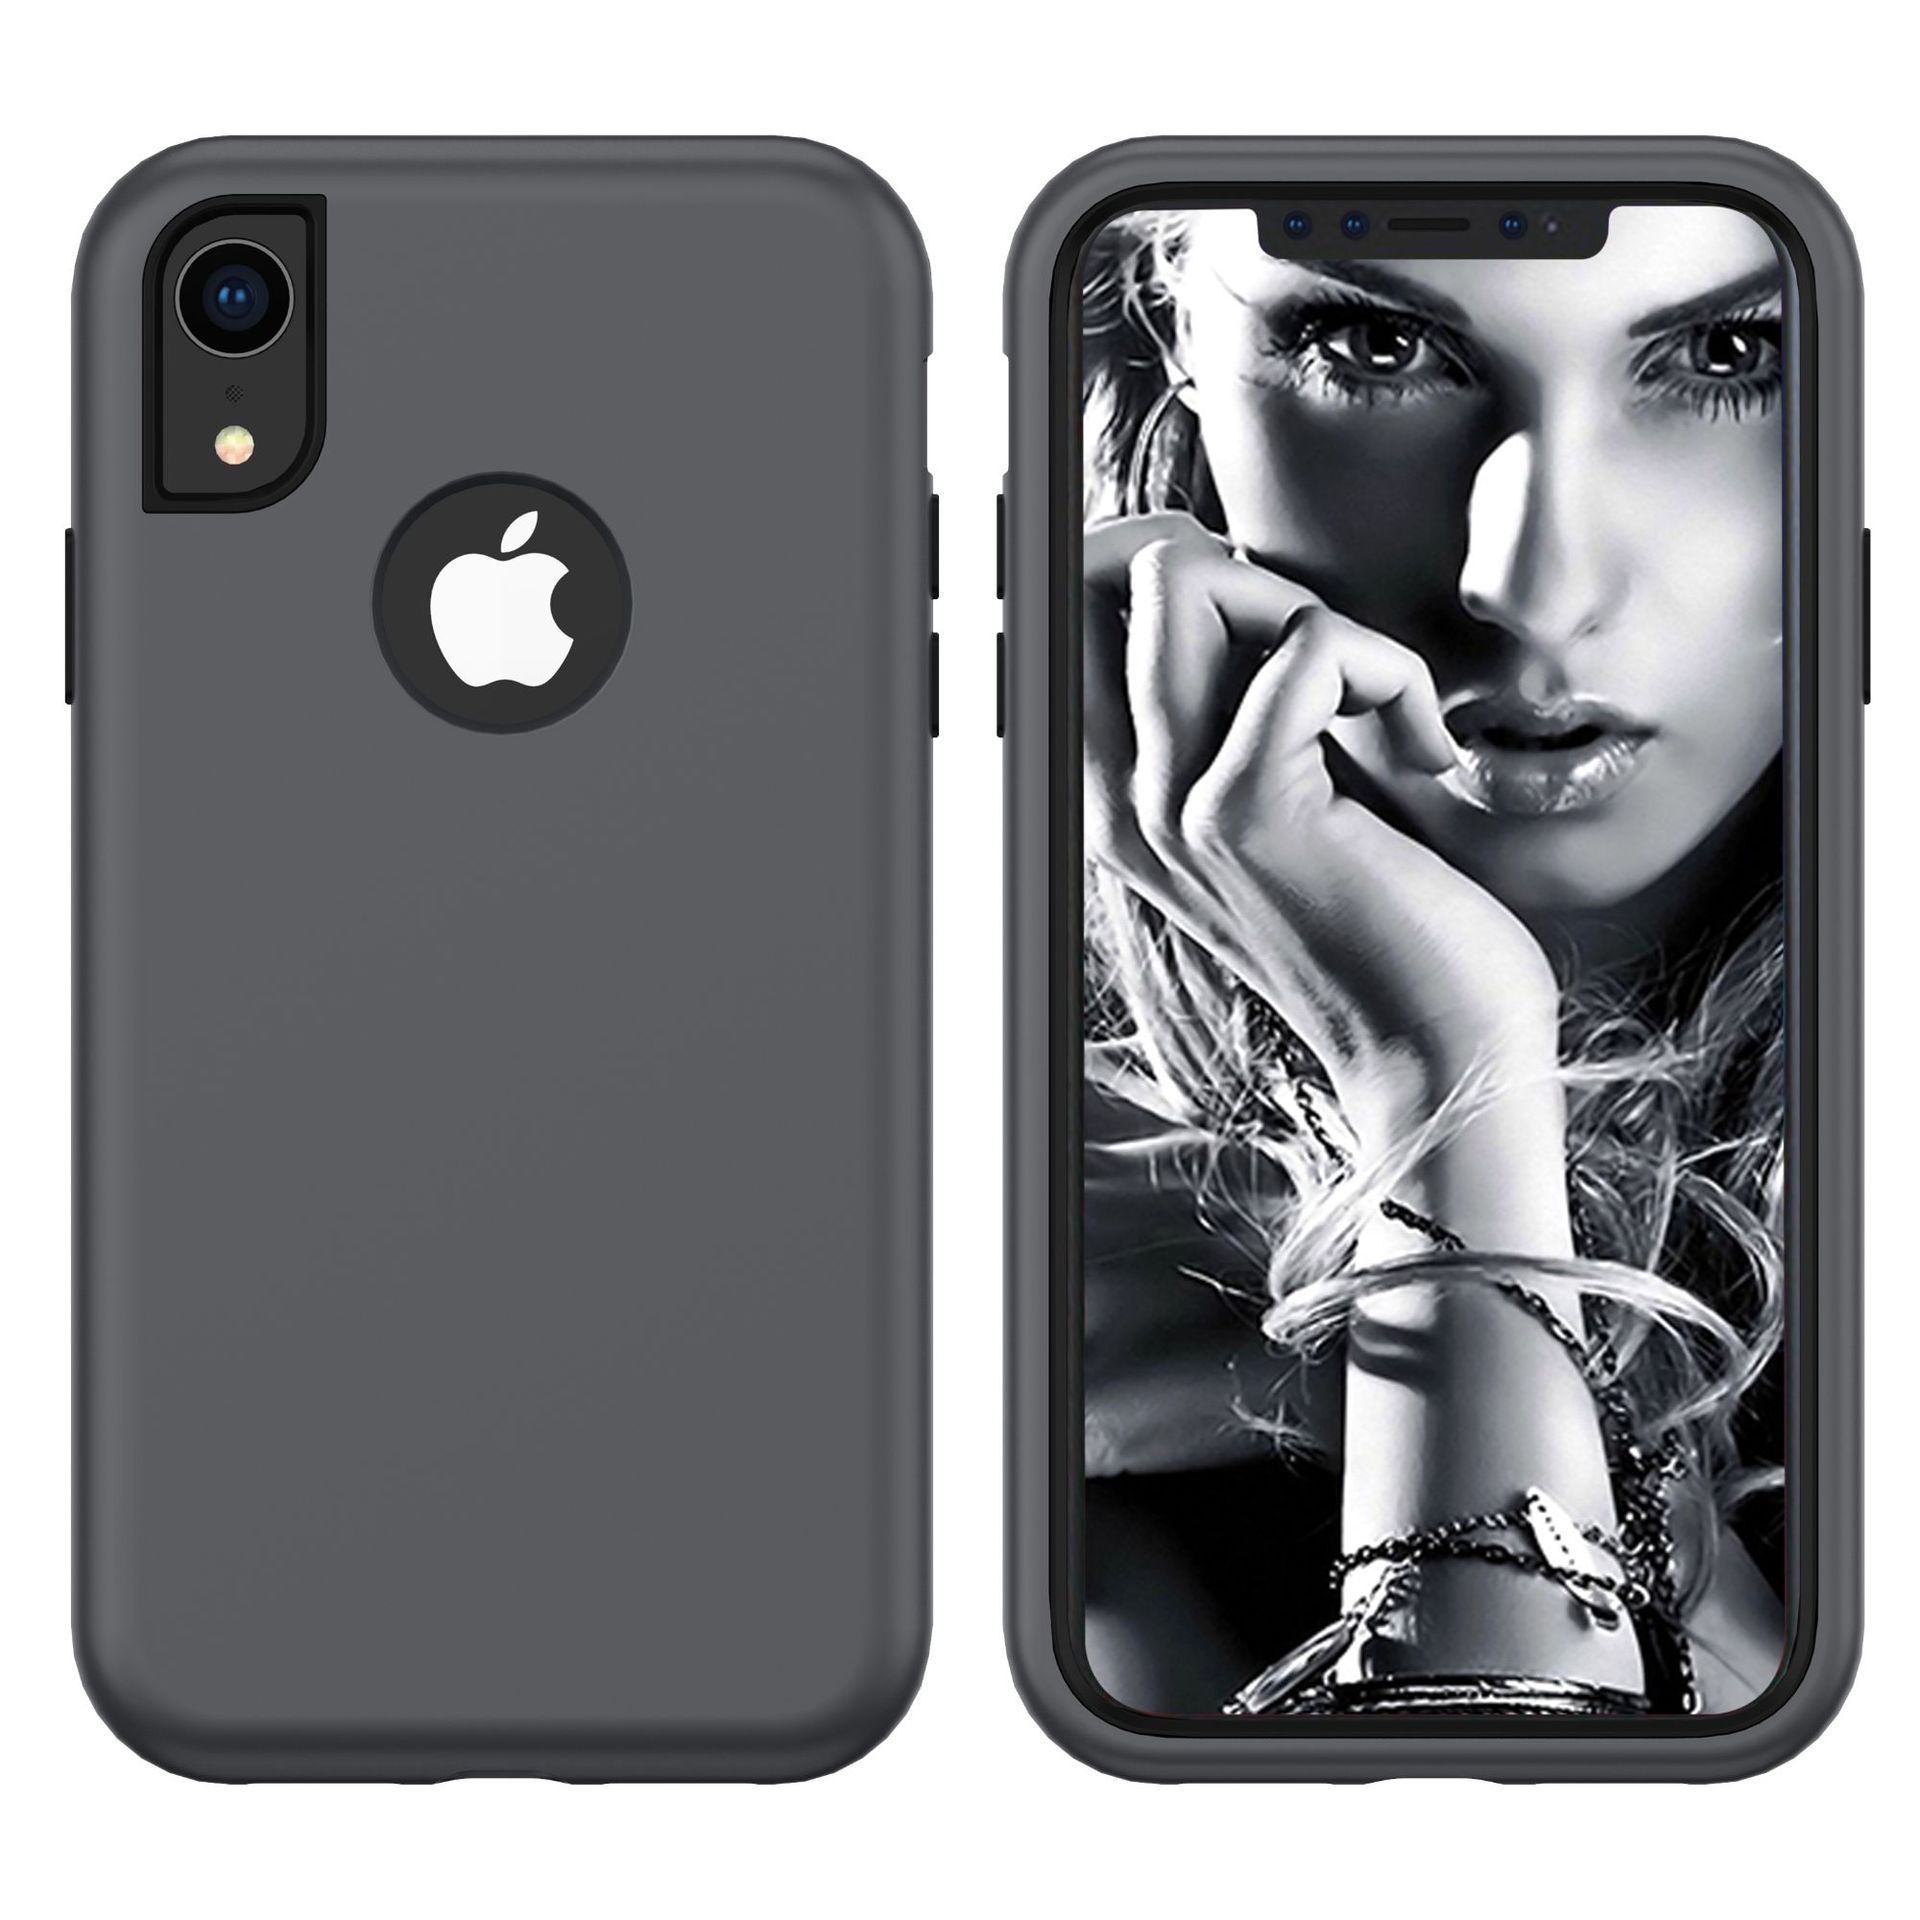 For iPhoneX/XS, XR, XS Max 3 in 1 Heavy Duty Hybrid Rugged Protective Case